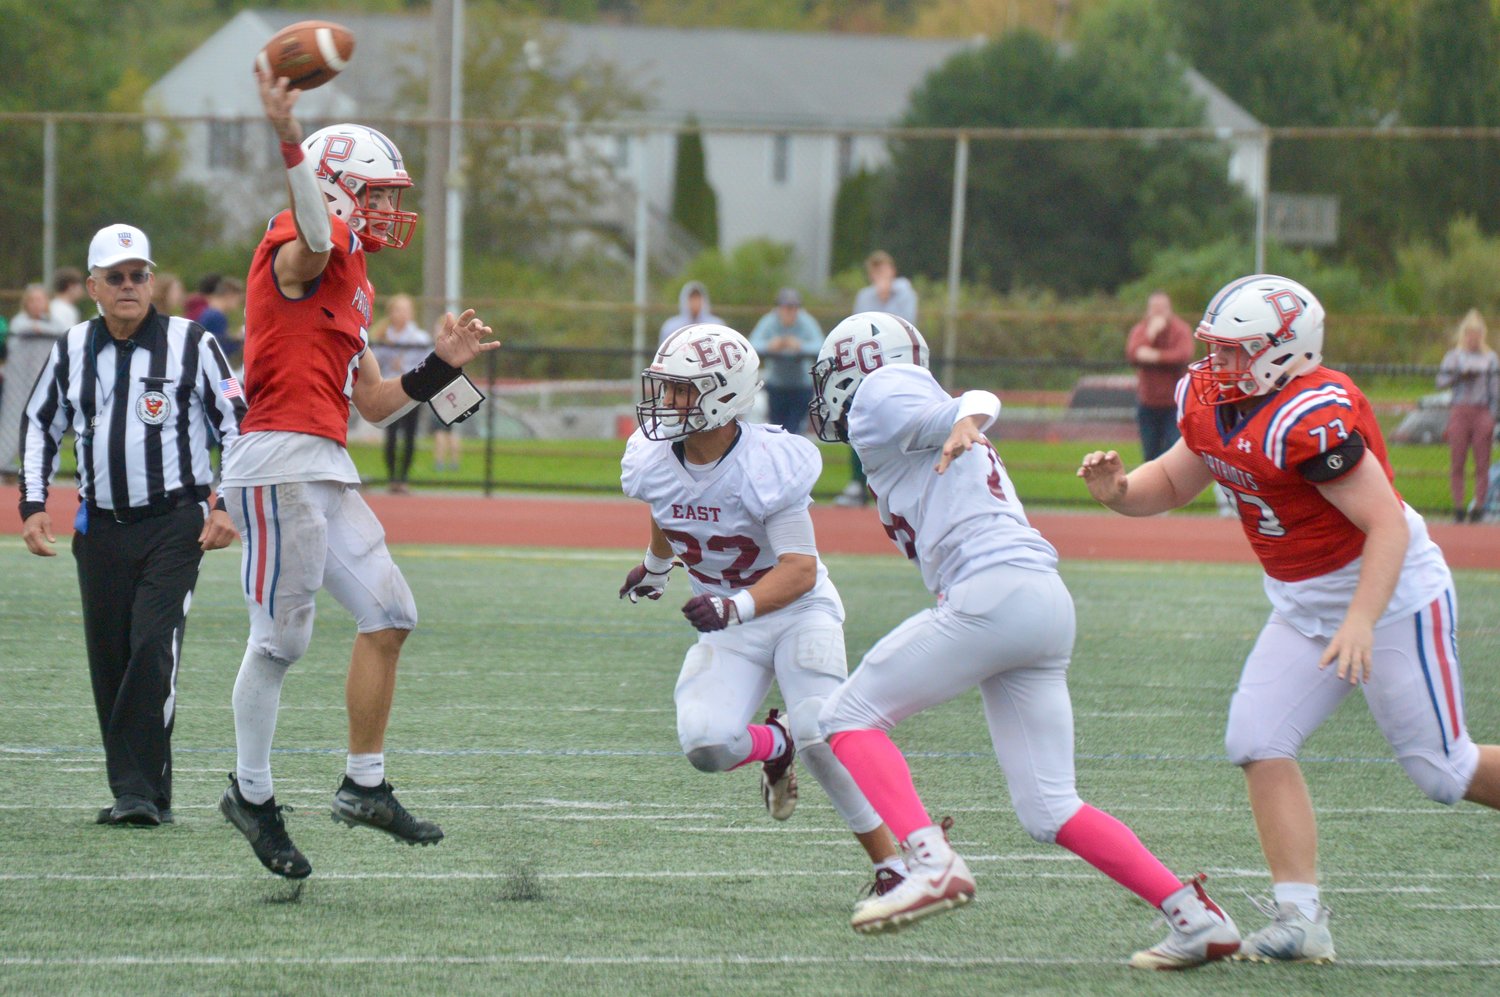 Portsmouth High quarterback Ben Hurd passes over two defenders in the first half of Saturday’s Homecoming game against East Greenwich. He had a big day, to say the least.